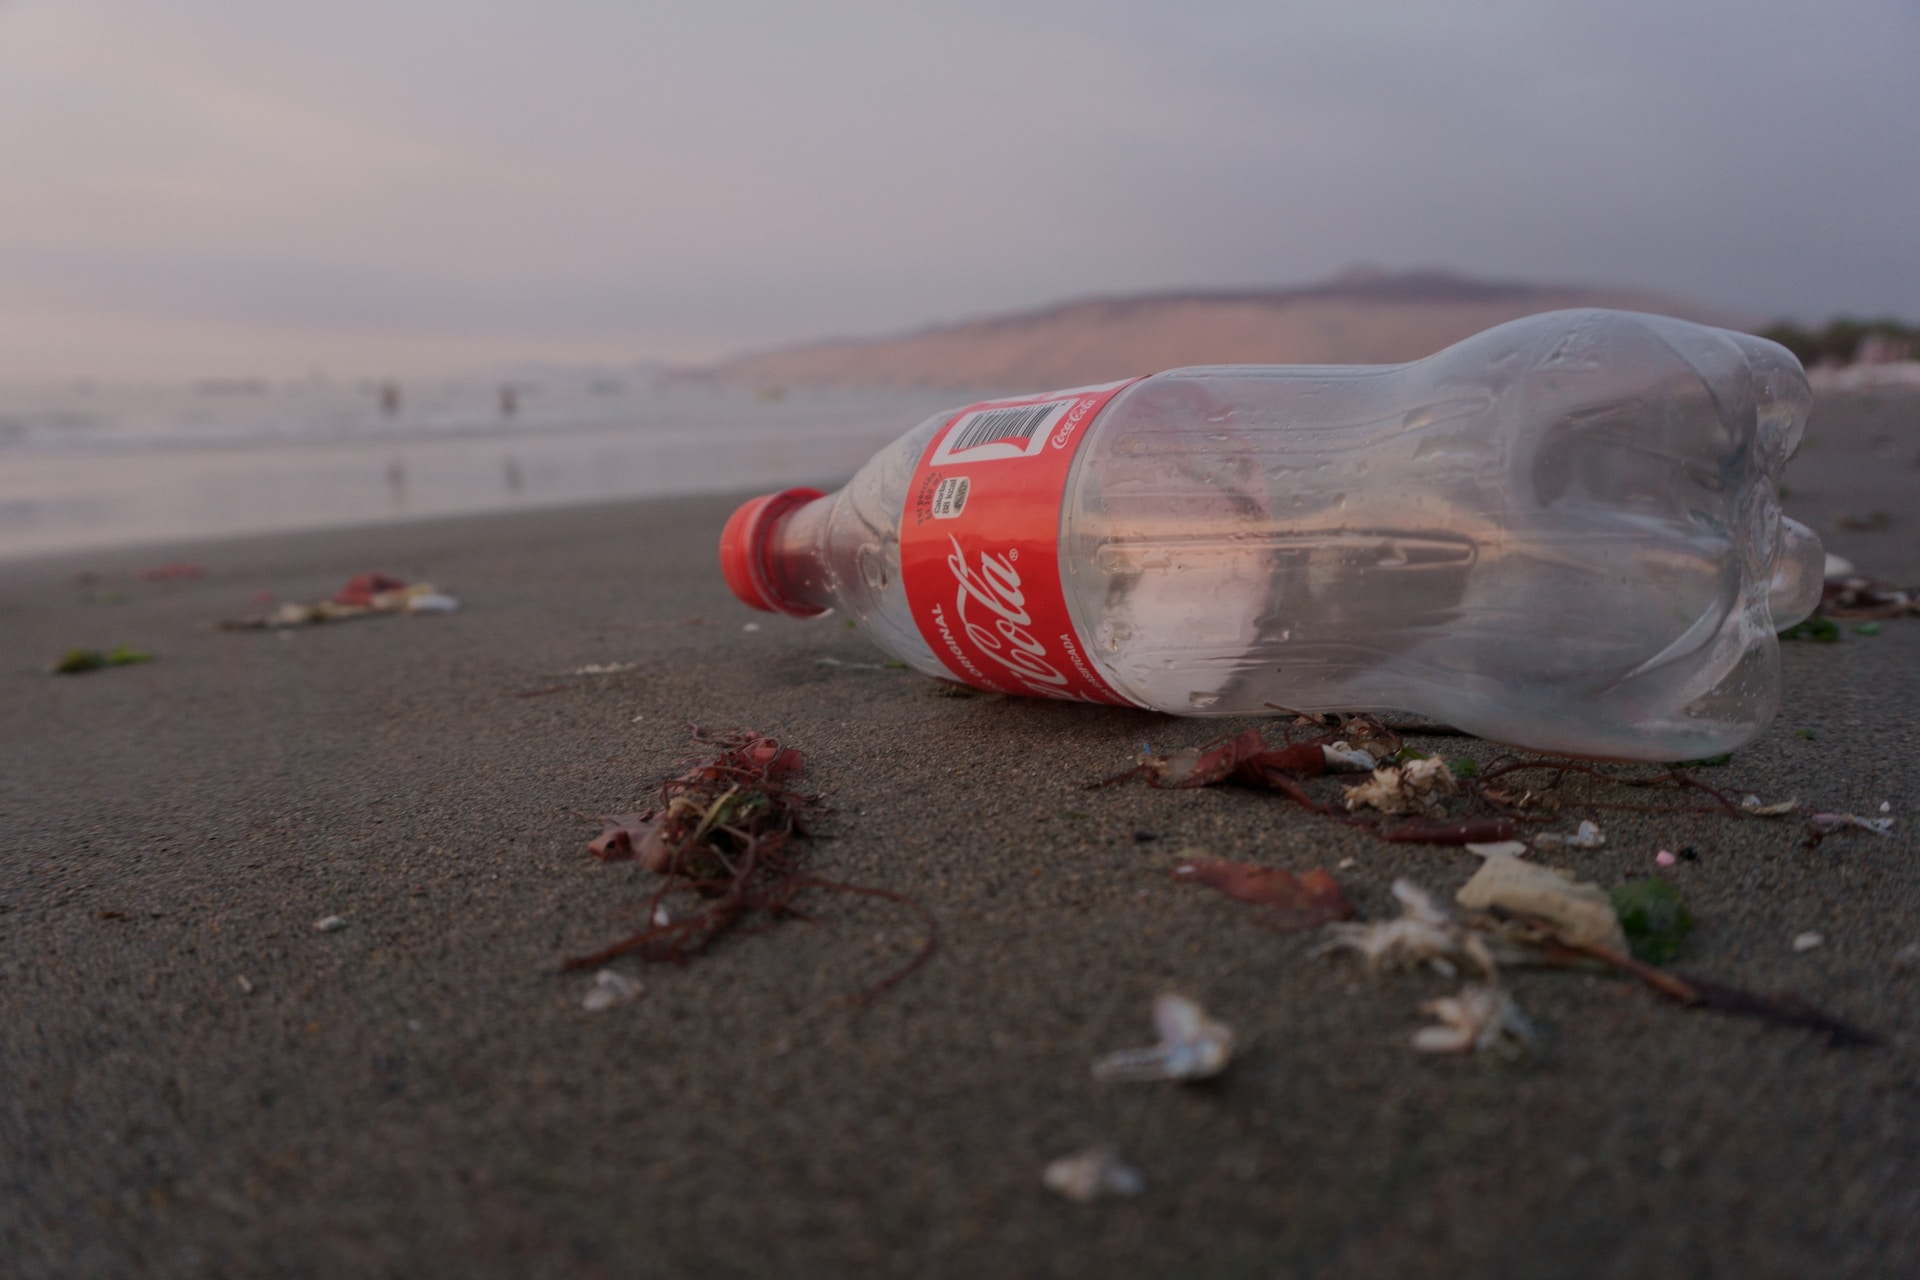 Coca Cola Europacific Partners (CCEP) announced investment into carbon conversion research to explore better sustainable packaging materials. Photo by maria mendiola on Unsplash.